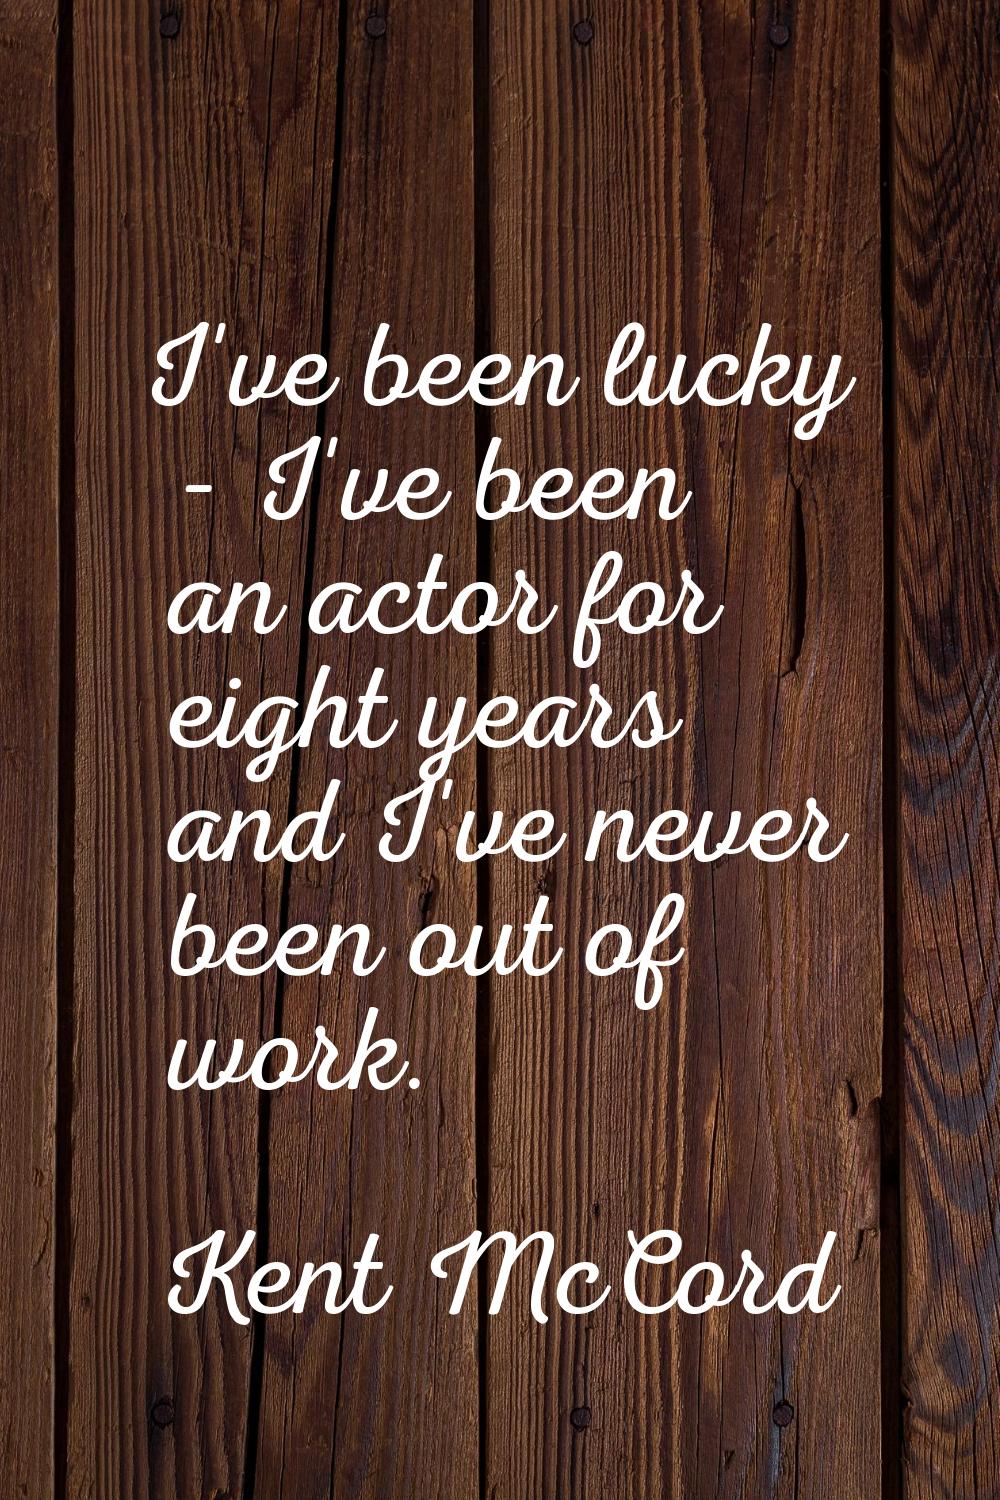 I've been lucky - I've been an actor for eight years and I've never been out of work.